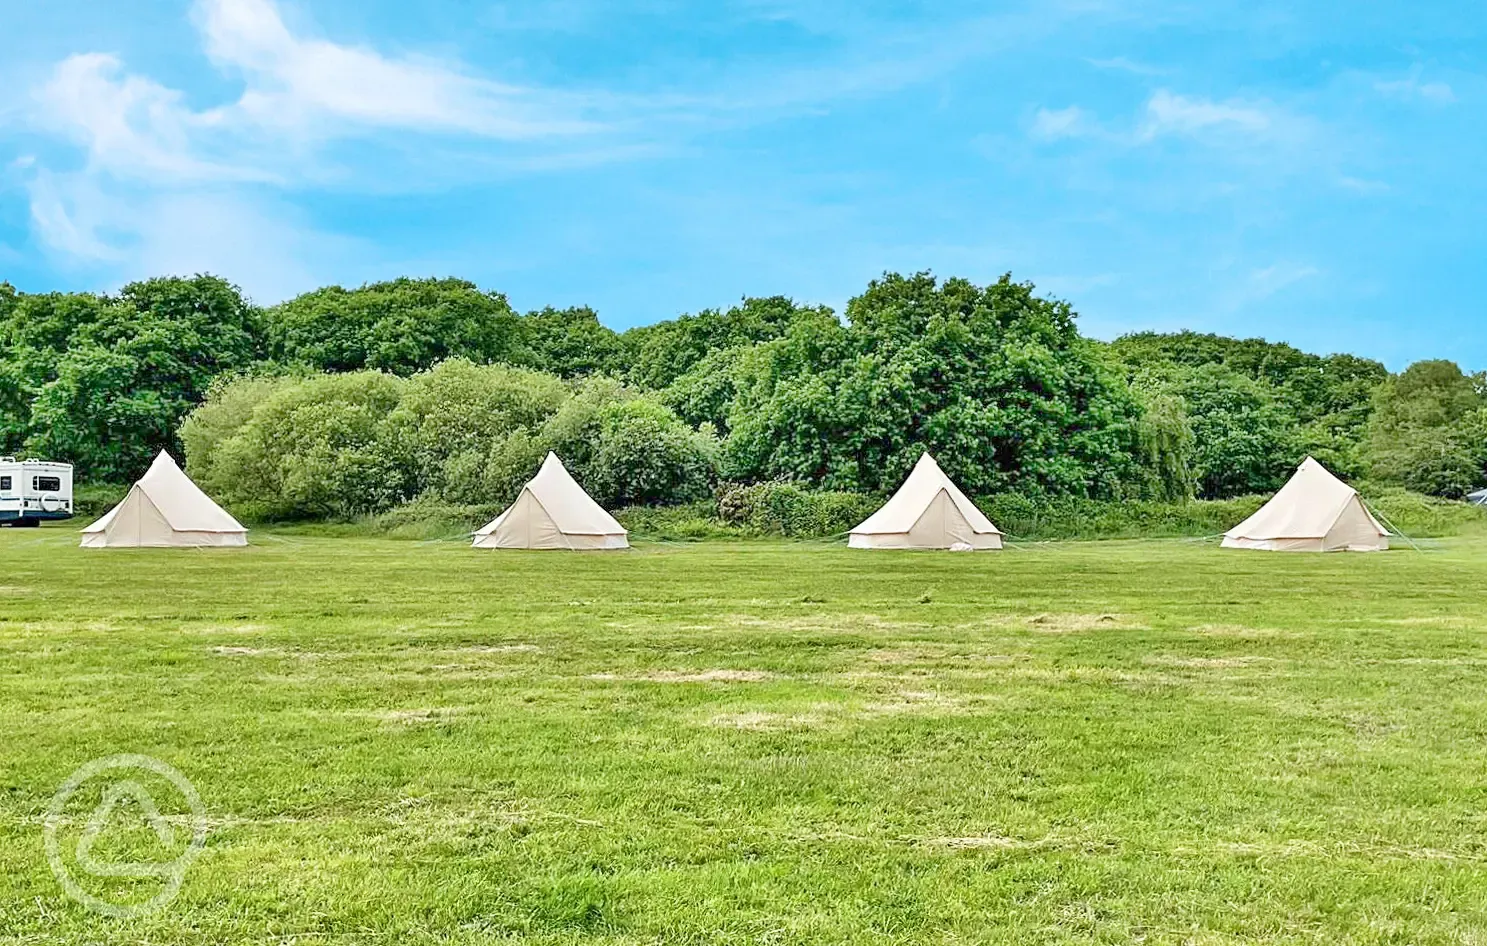 Bell tents